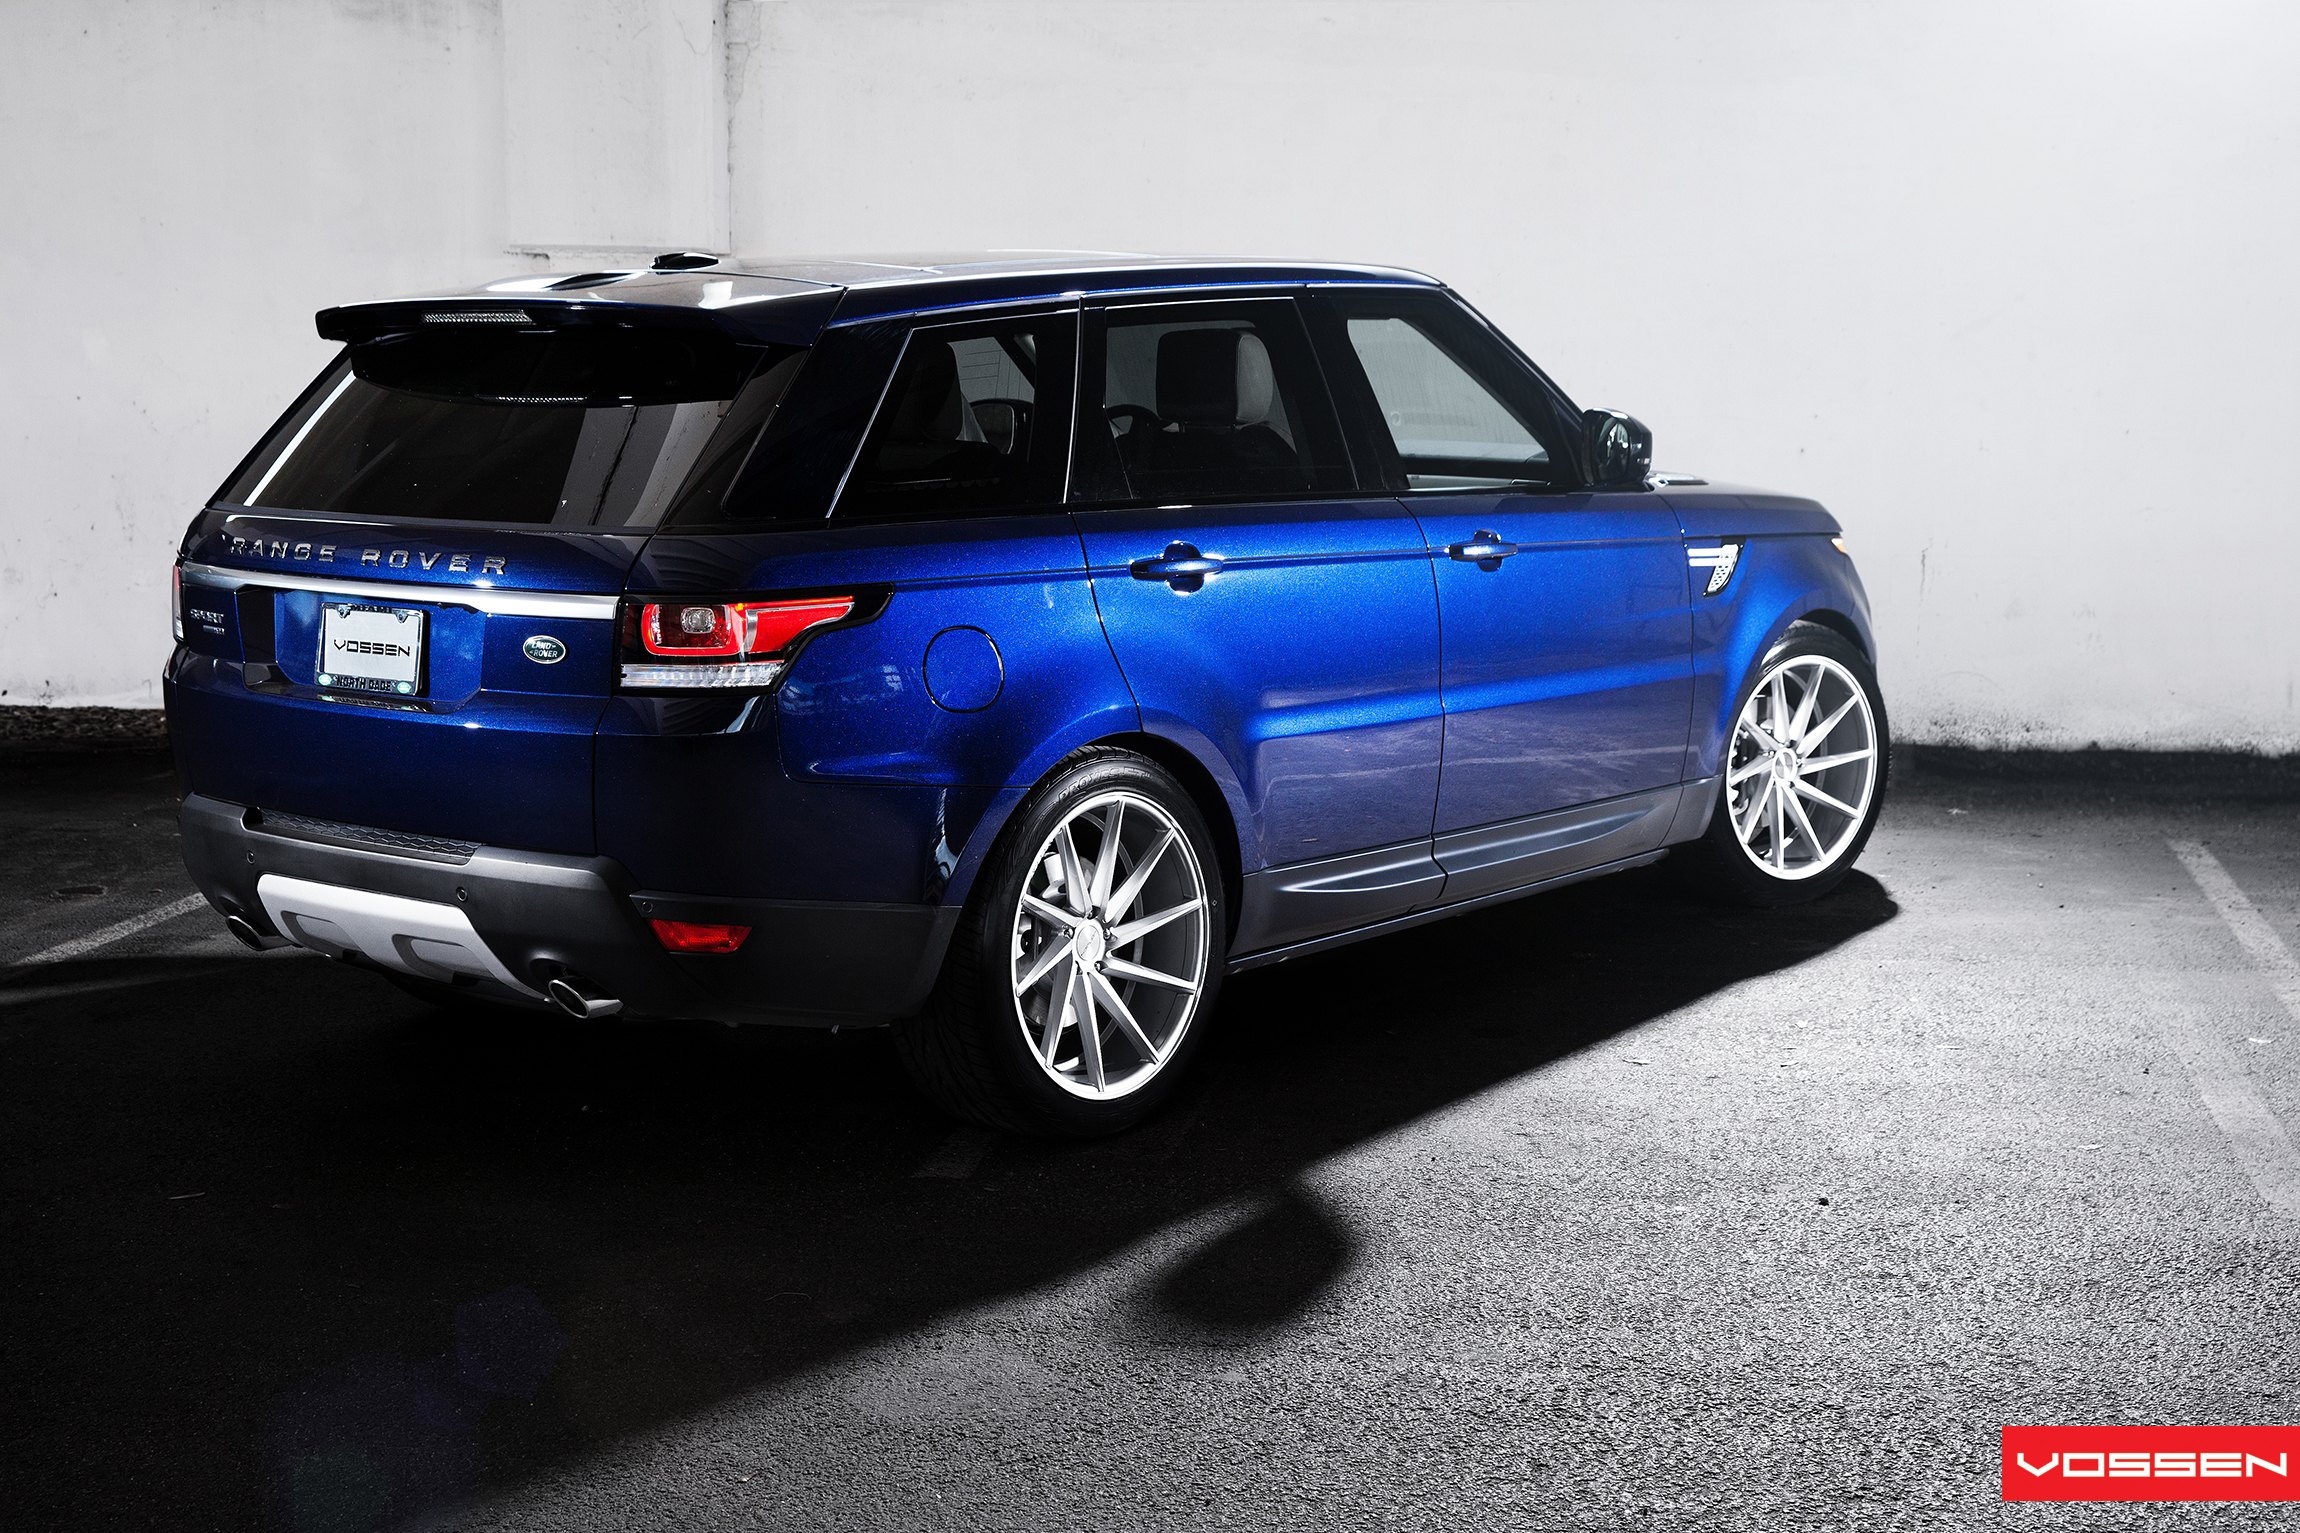 Blue Land Rover Sport with Aftermarket Rear Bumper Cover - Photo by Vossen